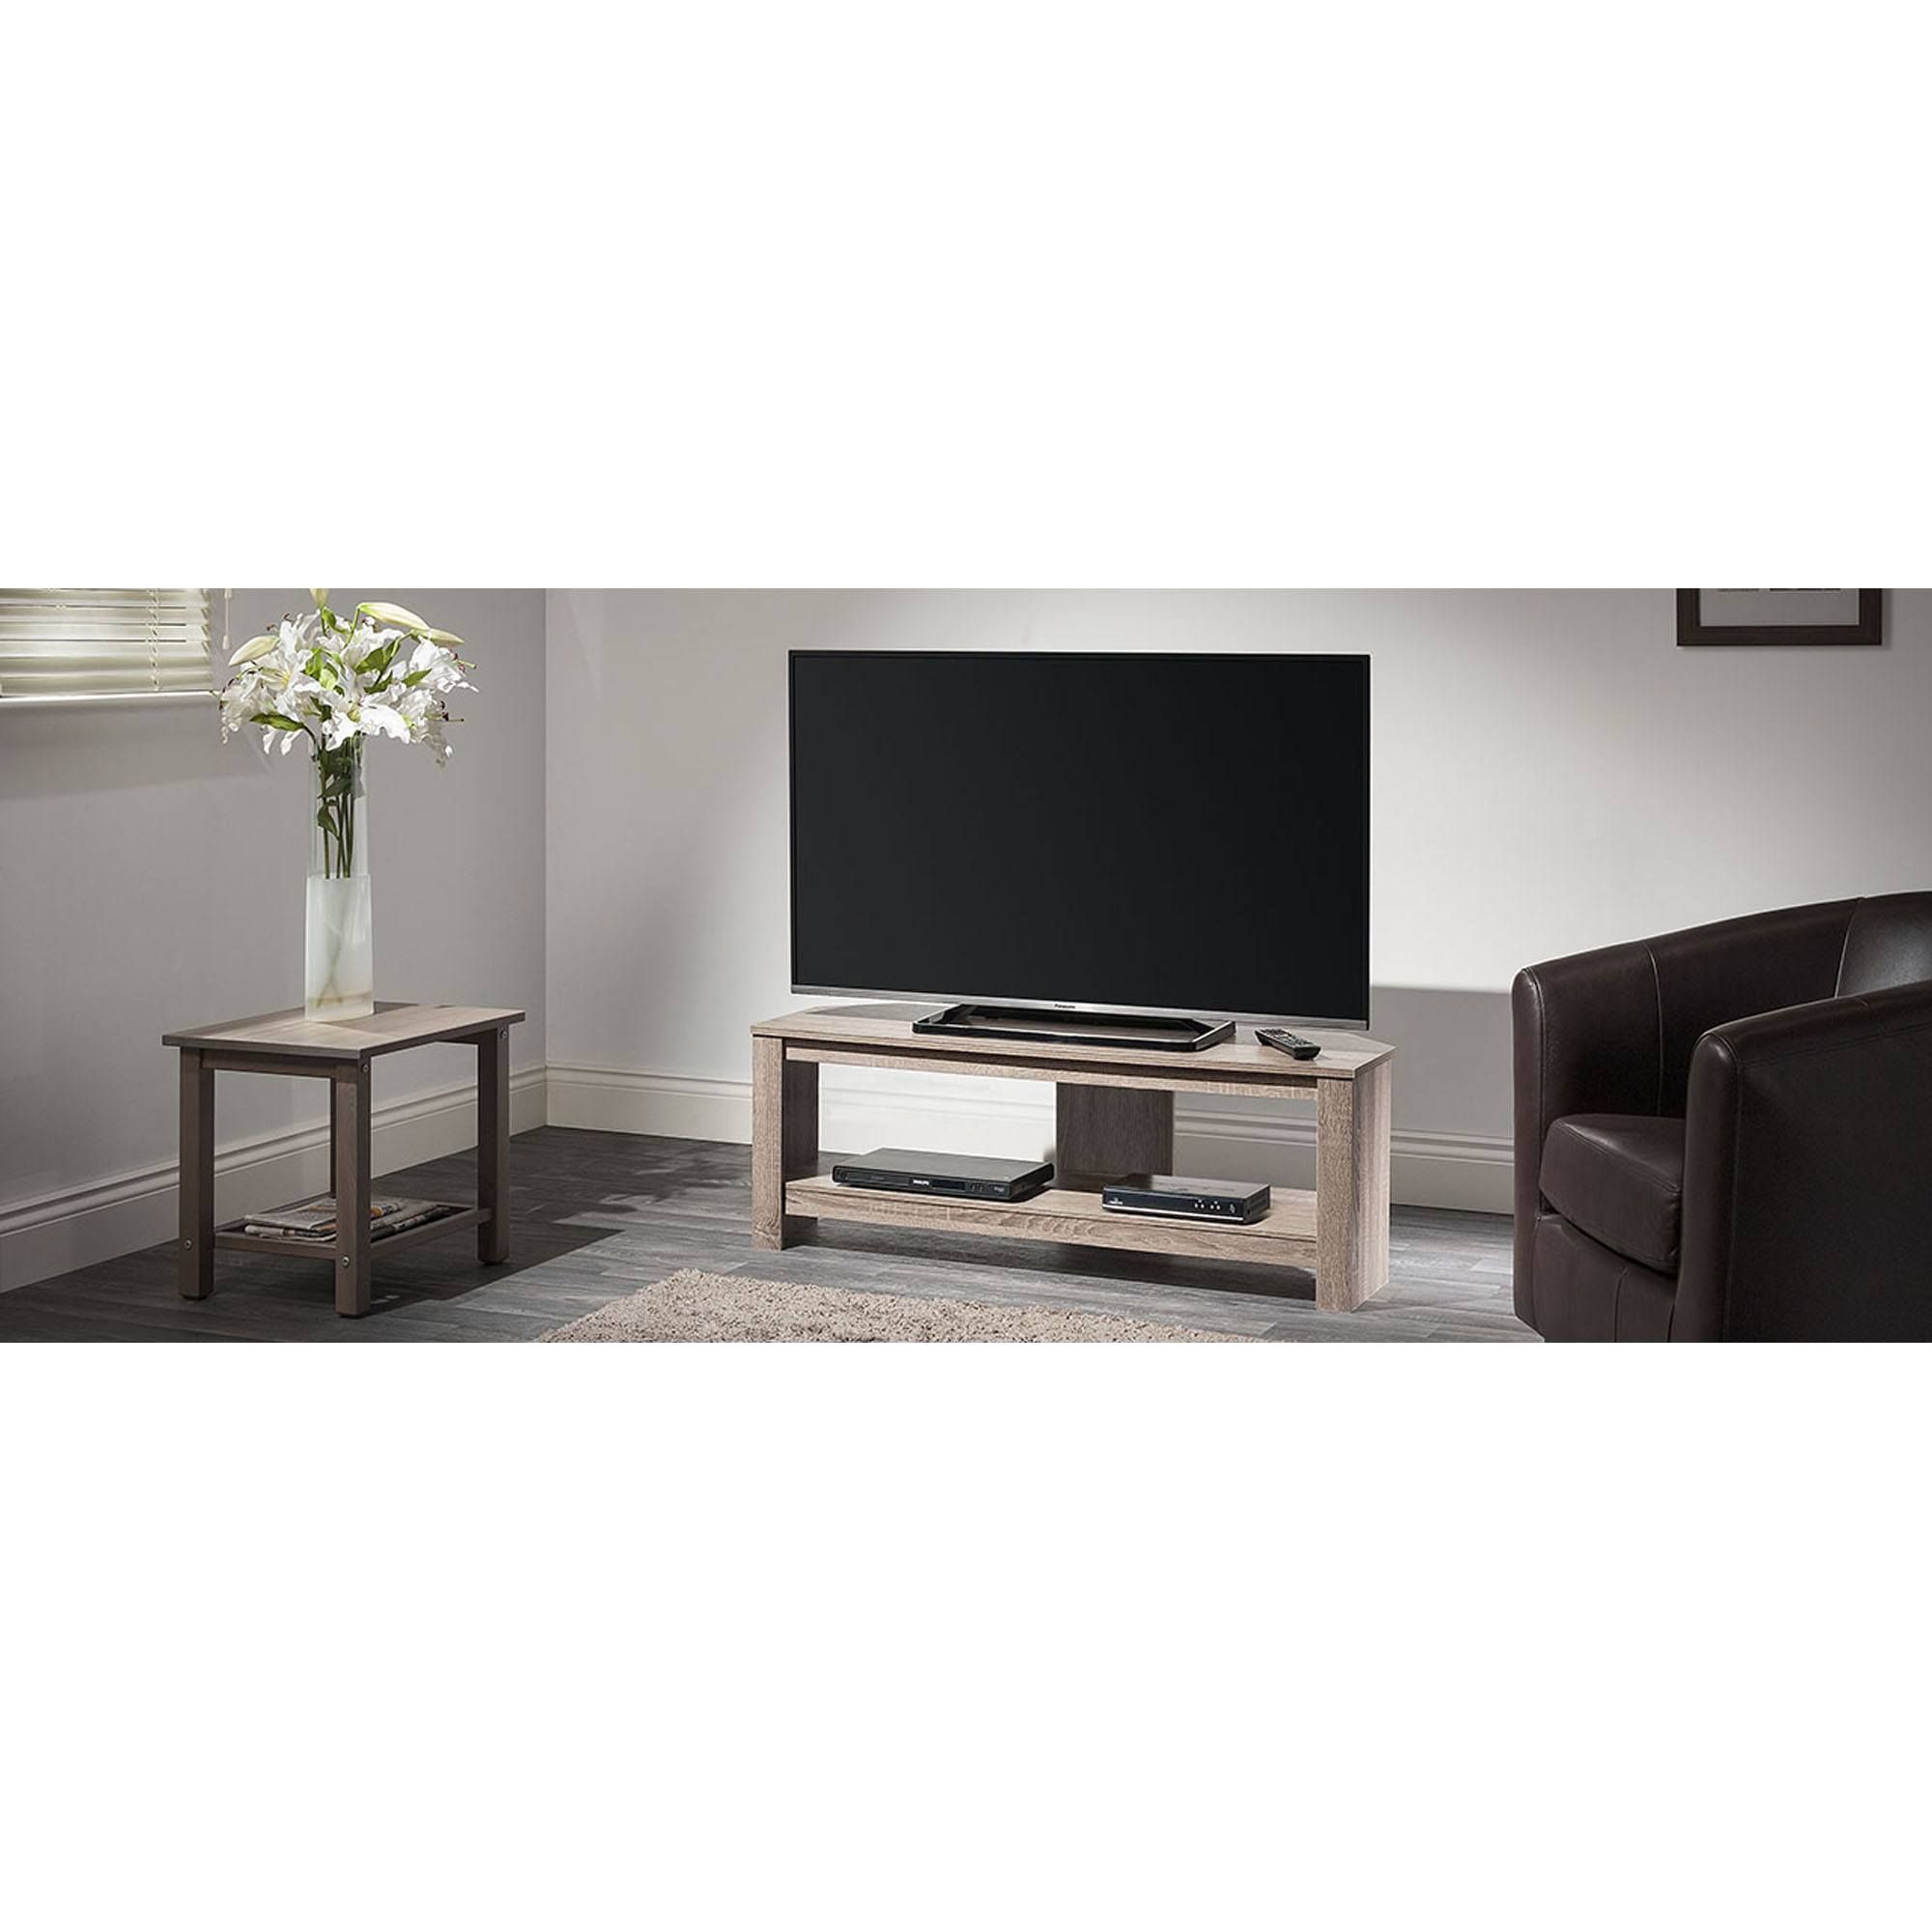 Tech Link Calibre Corner Tv Stand For Up To 55" | Hughes Within Spellman Tv Stands For Tvs Up To 55" (View 9 of 15)